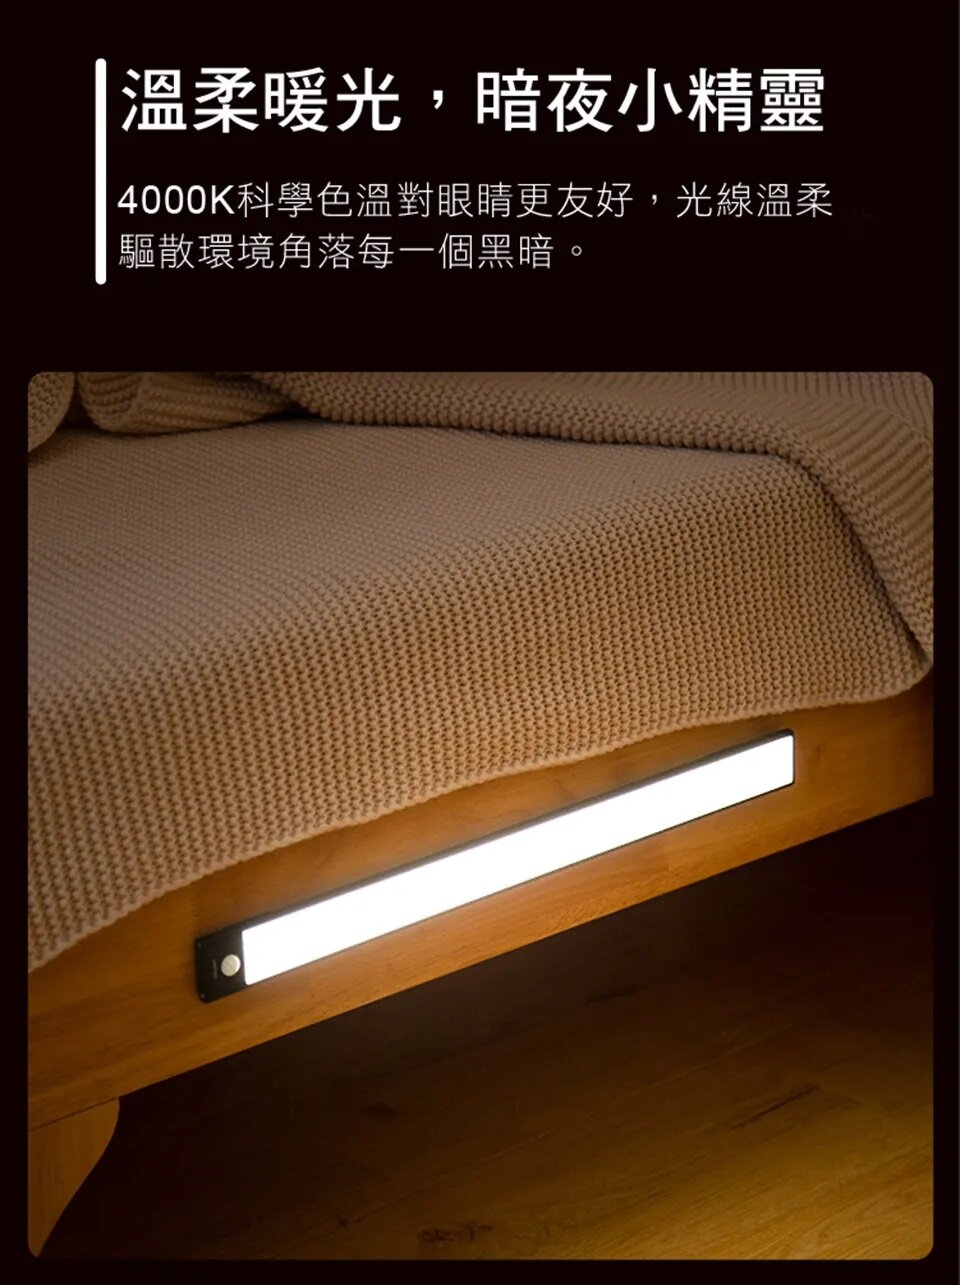 YEELIGHT - Yilai rechargeable induction cabinet light 60cm A60 (Global Version) | Magnetic light | Auto shut off | LED light strip | Wireless YLBGD-0046